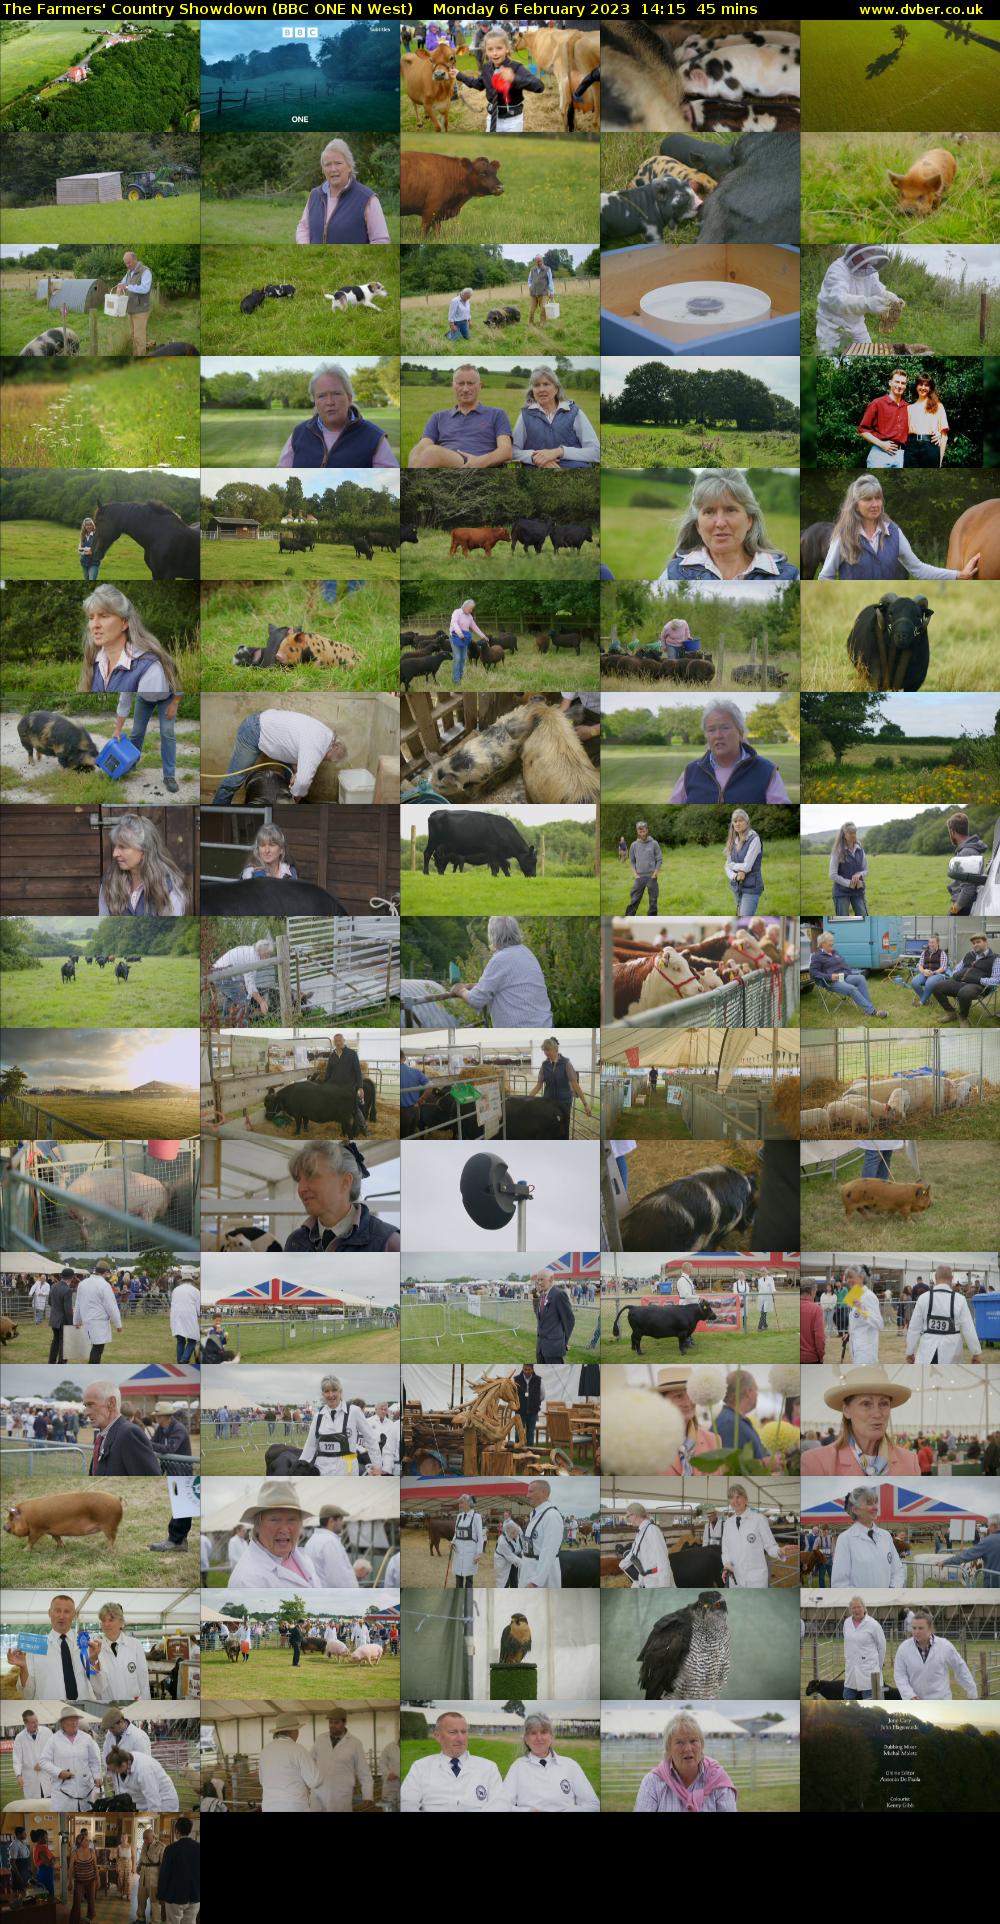 The Farmers' Country Showdown (BBC ONE N West) Monday 6 February 2023 14:15 - 15:00